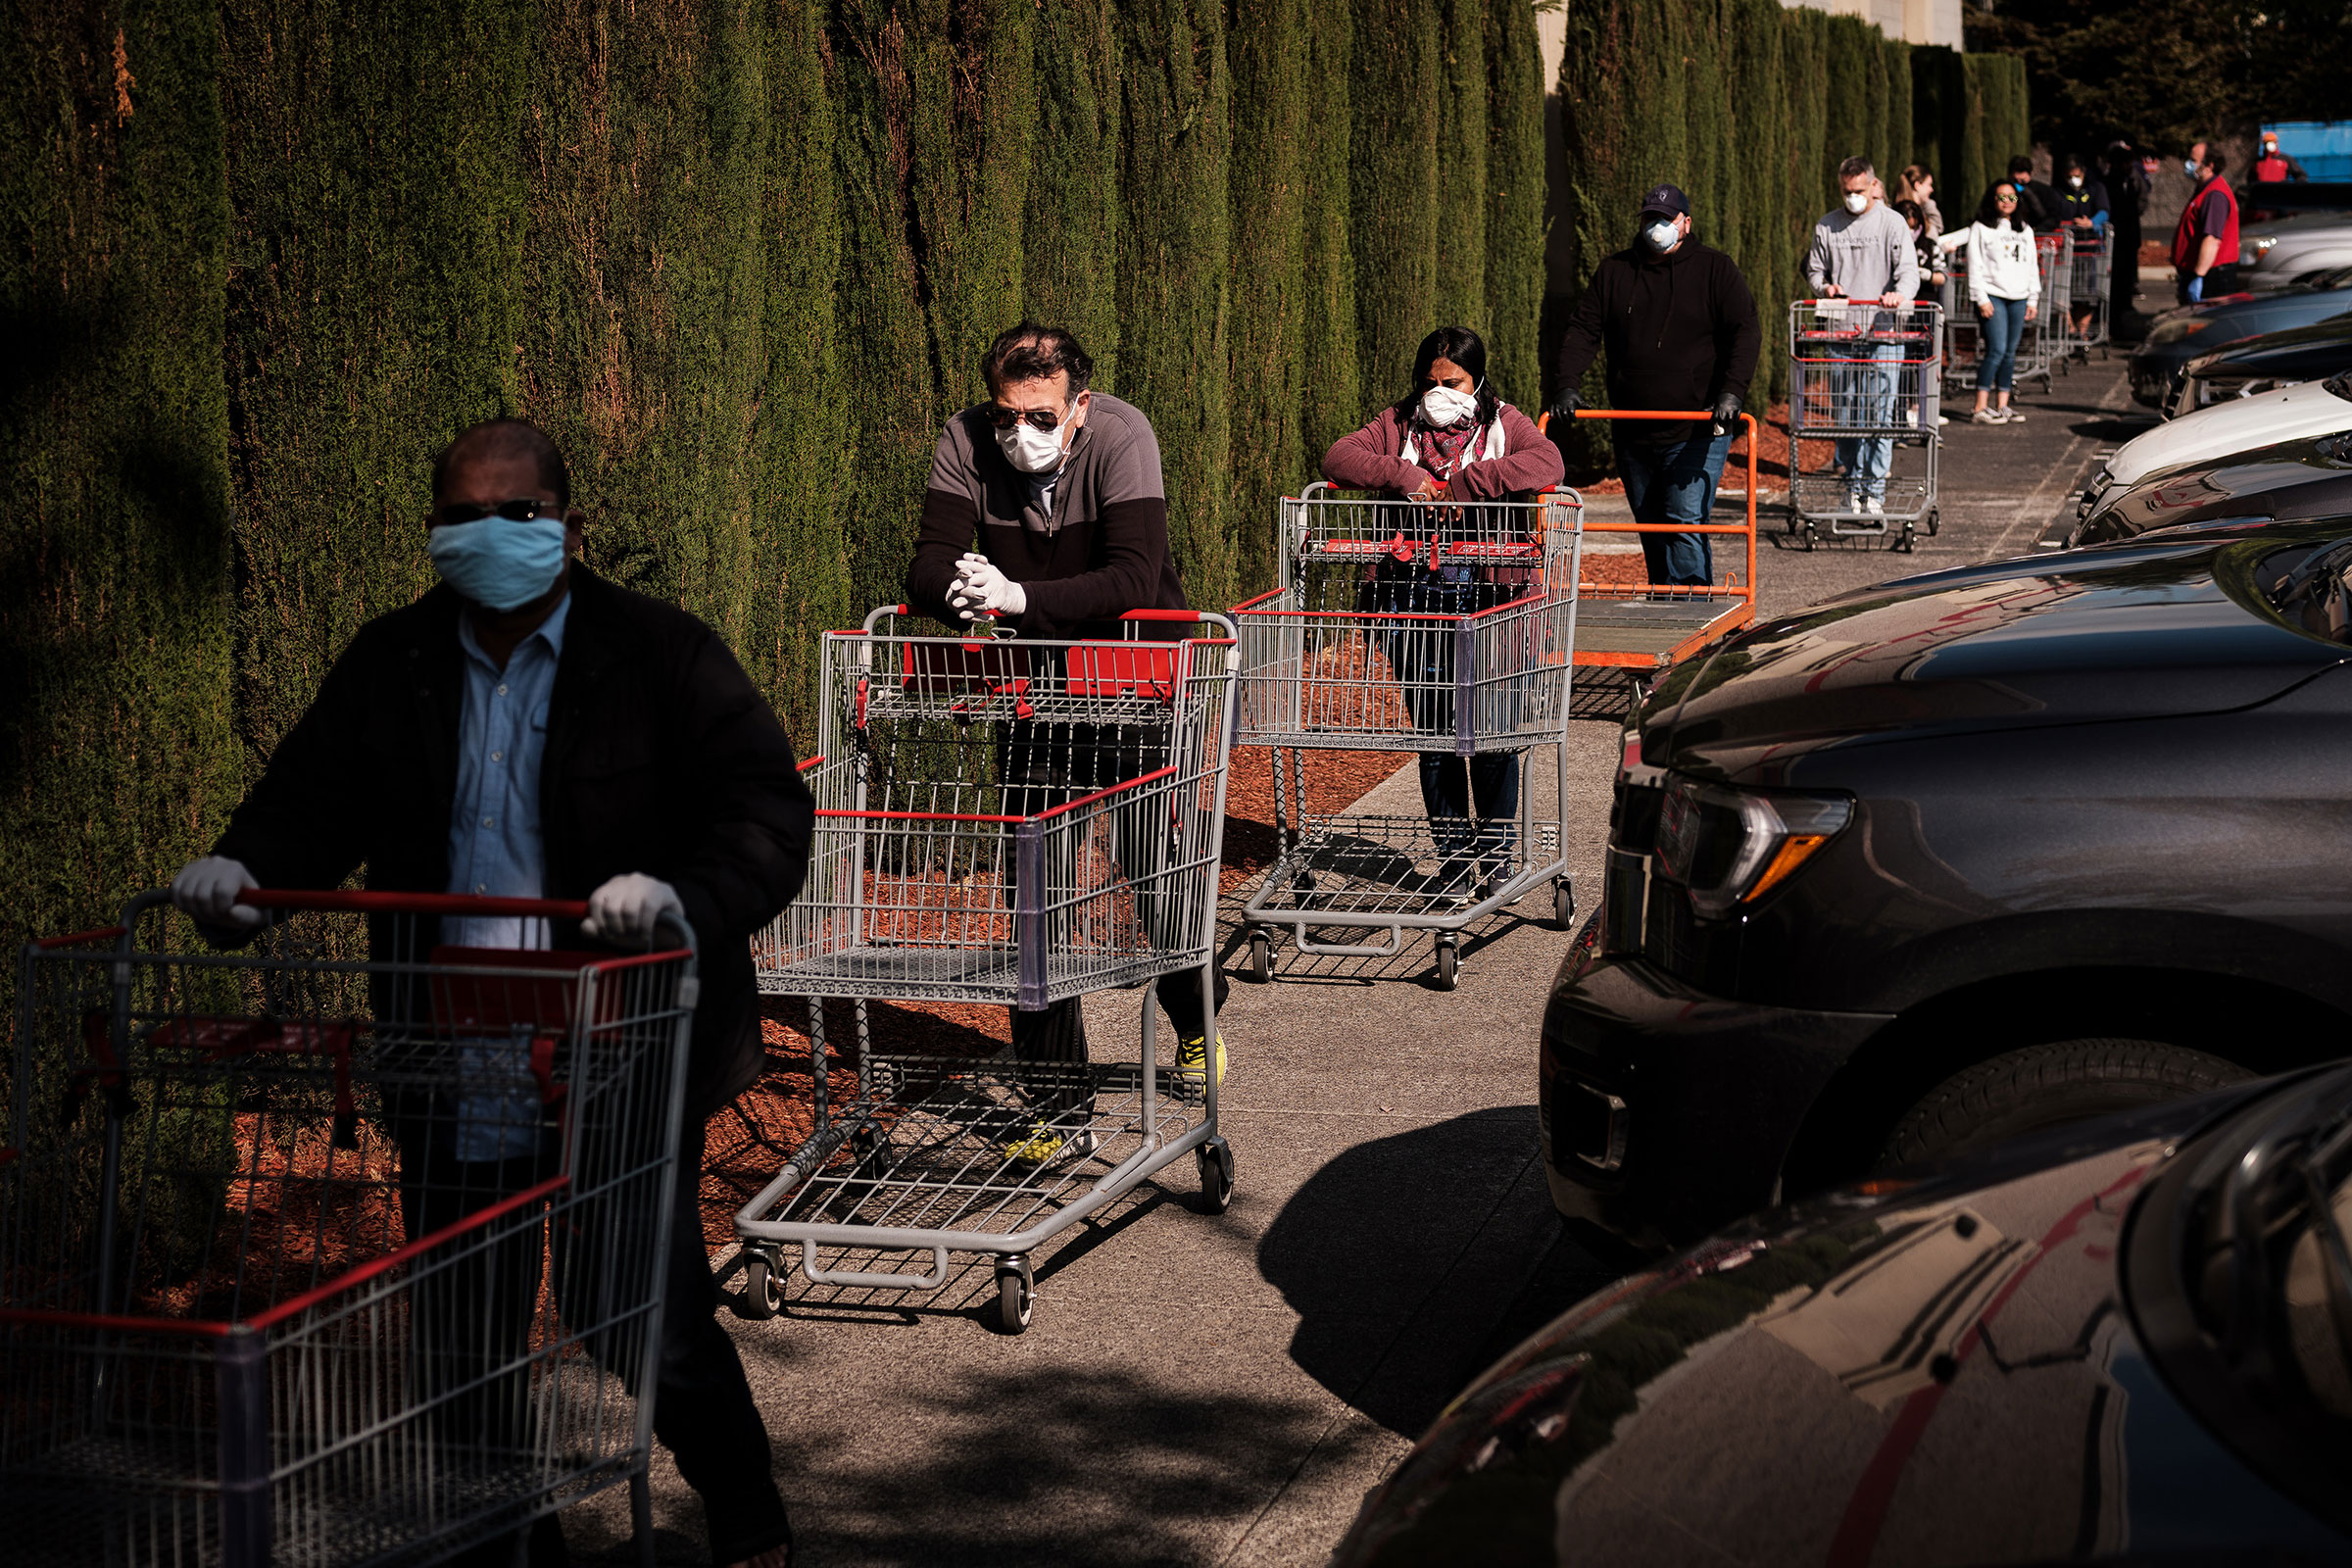 Shoppers outside a grocery store in Livermore, Calif., on April 10 (Max Whittaker—The New York Times/Redux)